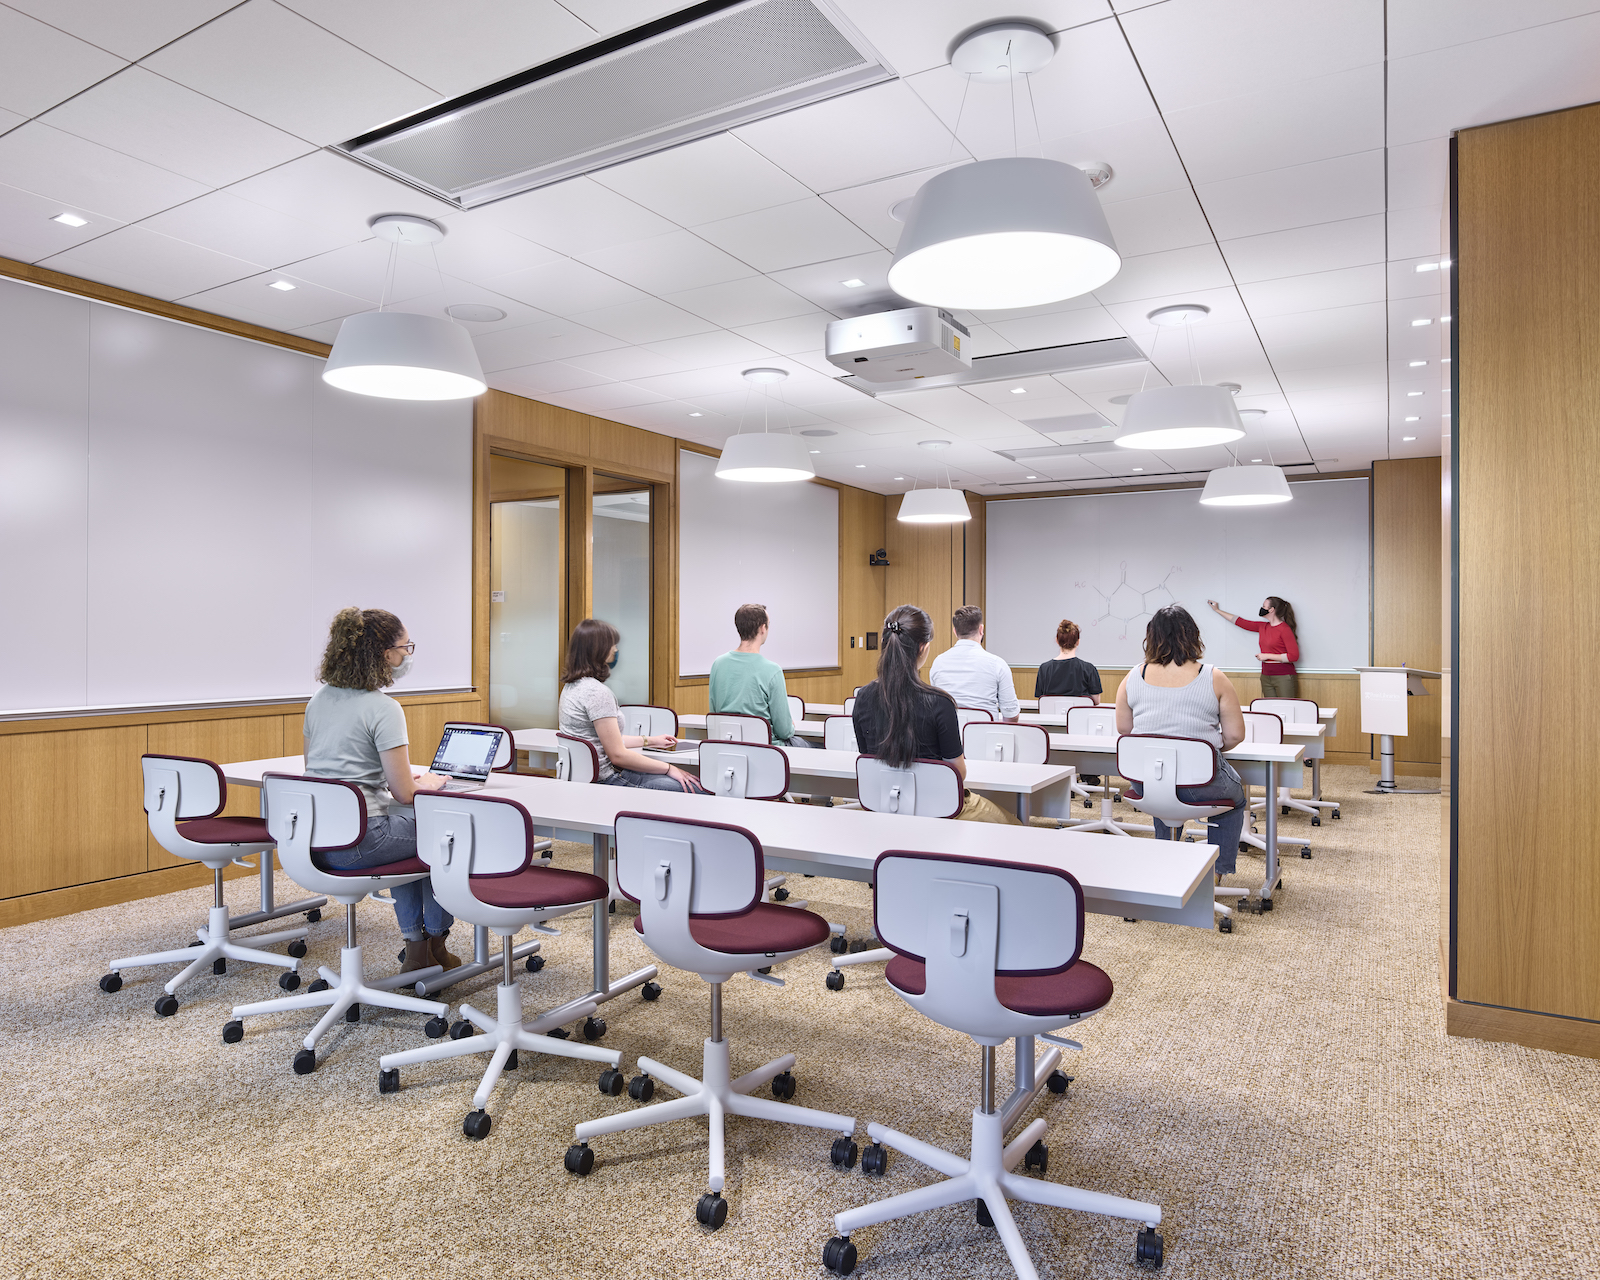 UPenn converts a library past its prime to a techintegrated learning